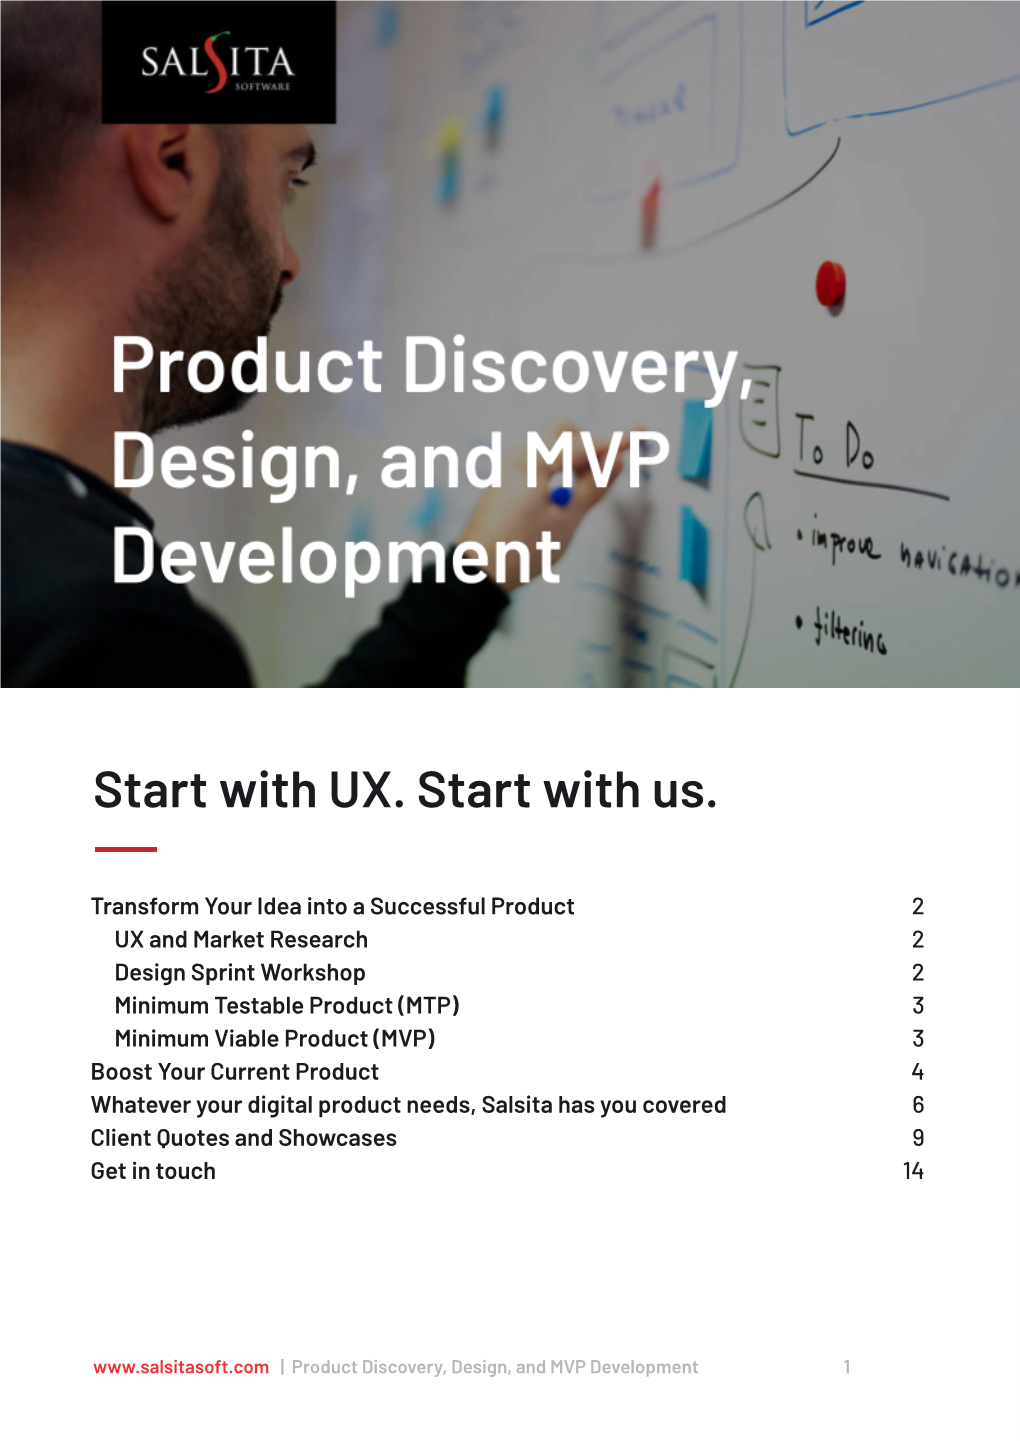 With UX. Start with Us